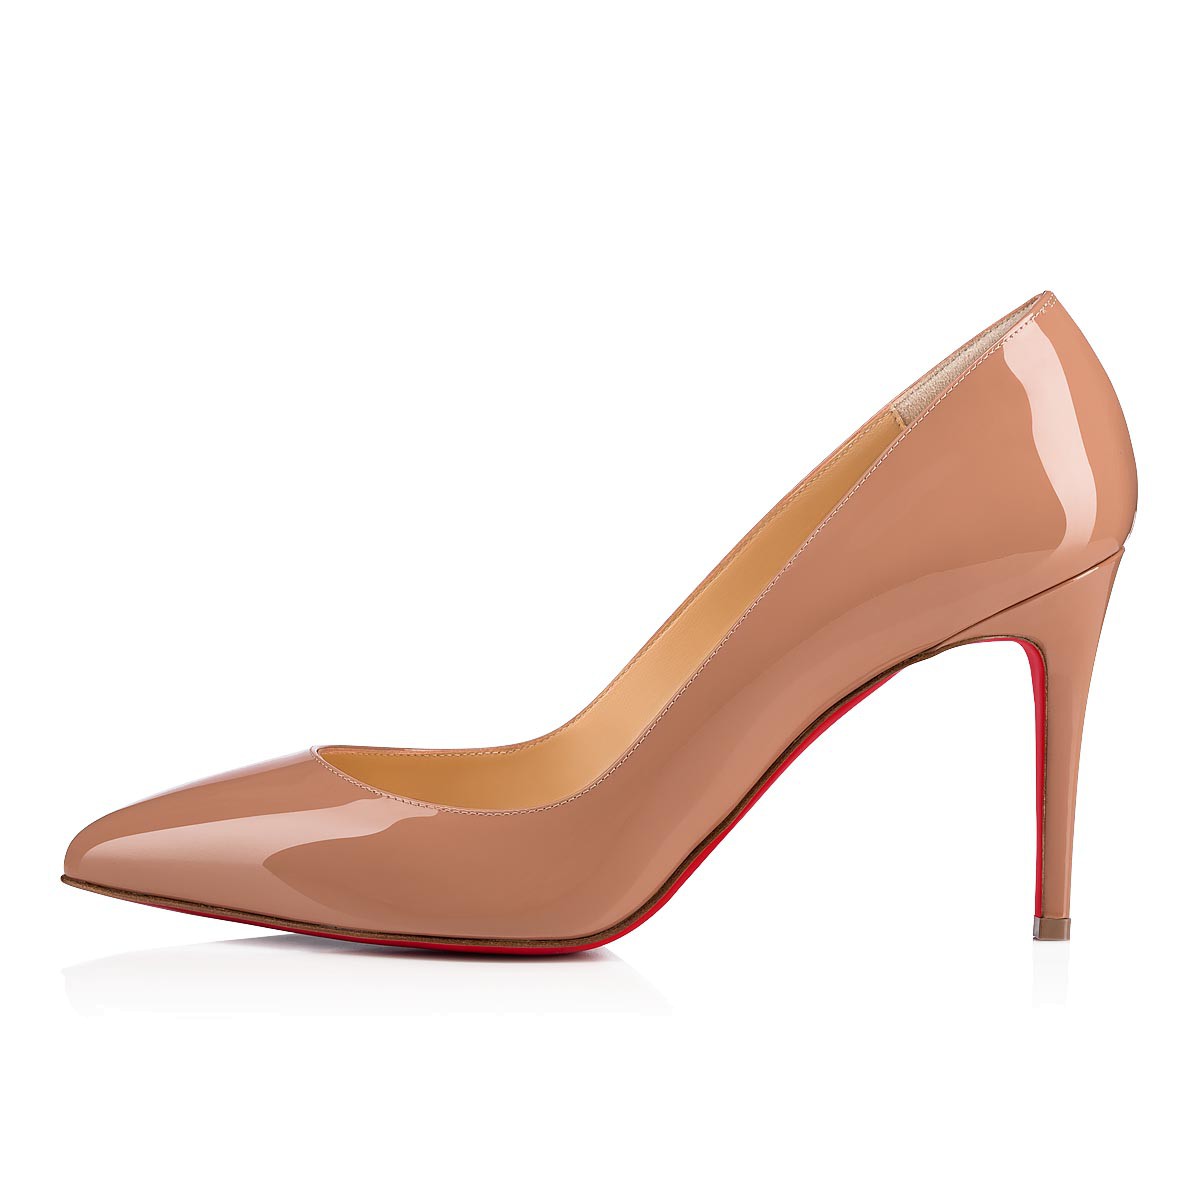 Christian Louboutin Women Shoes Pigalle 85 mm Heel Height-Sandy